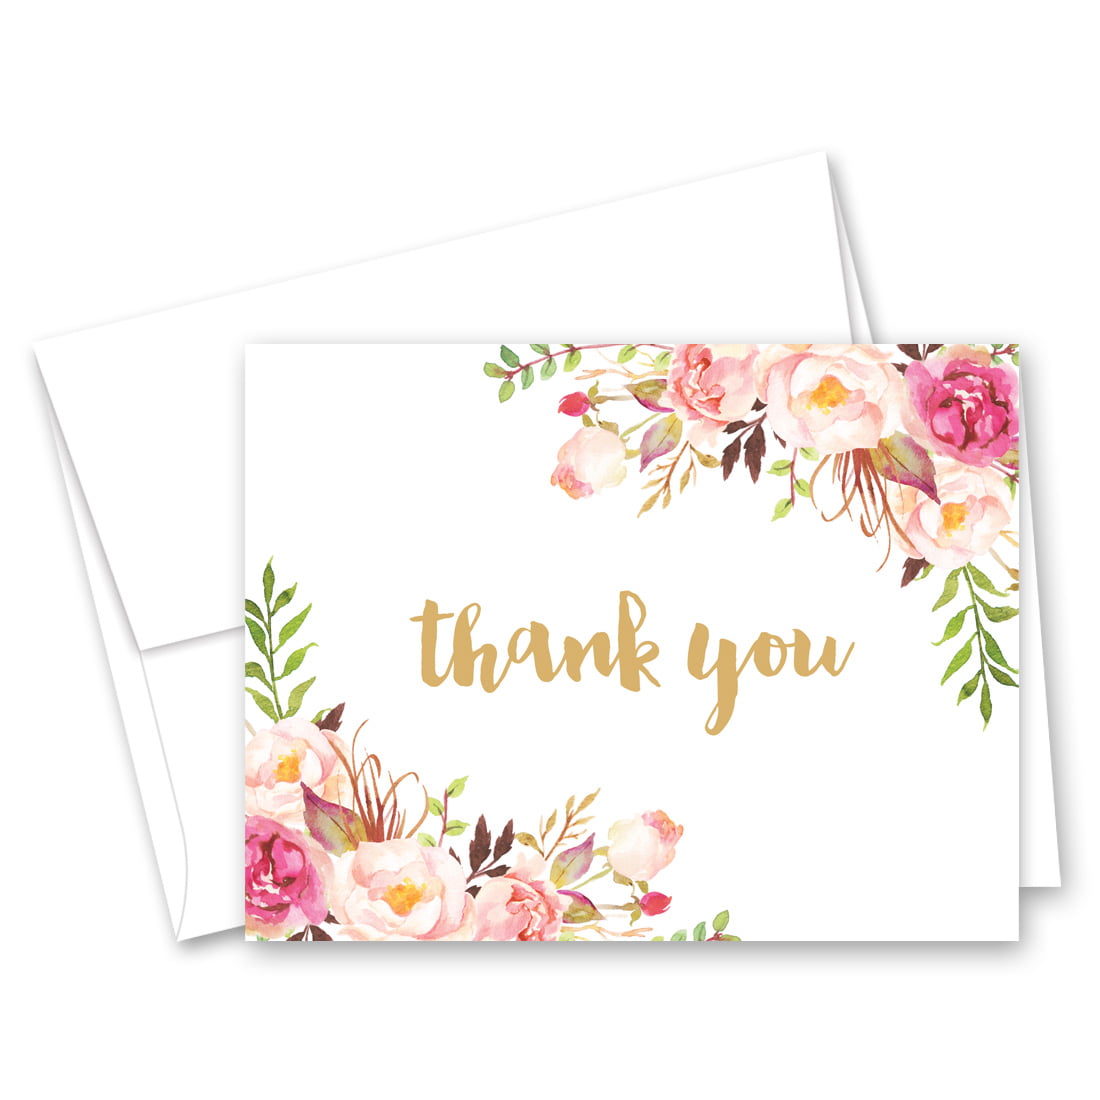 Thank You Details about   THANK YOU CARD Flowers Artsy Hallmark Greeting Card Pretty 